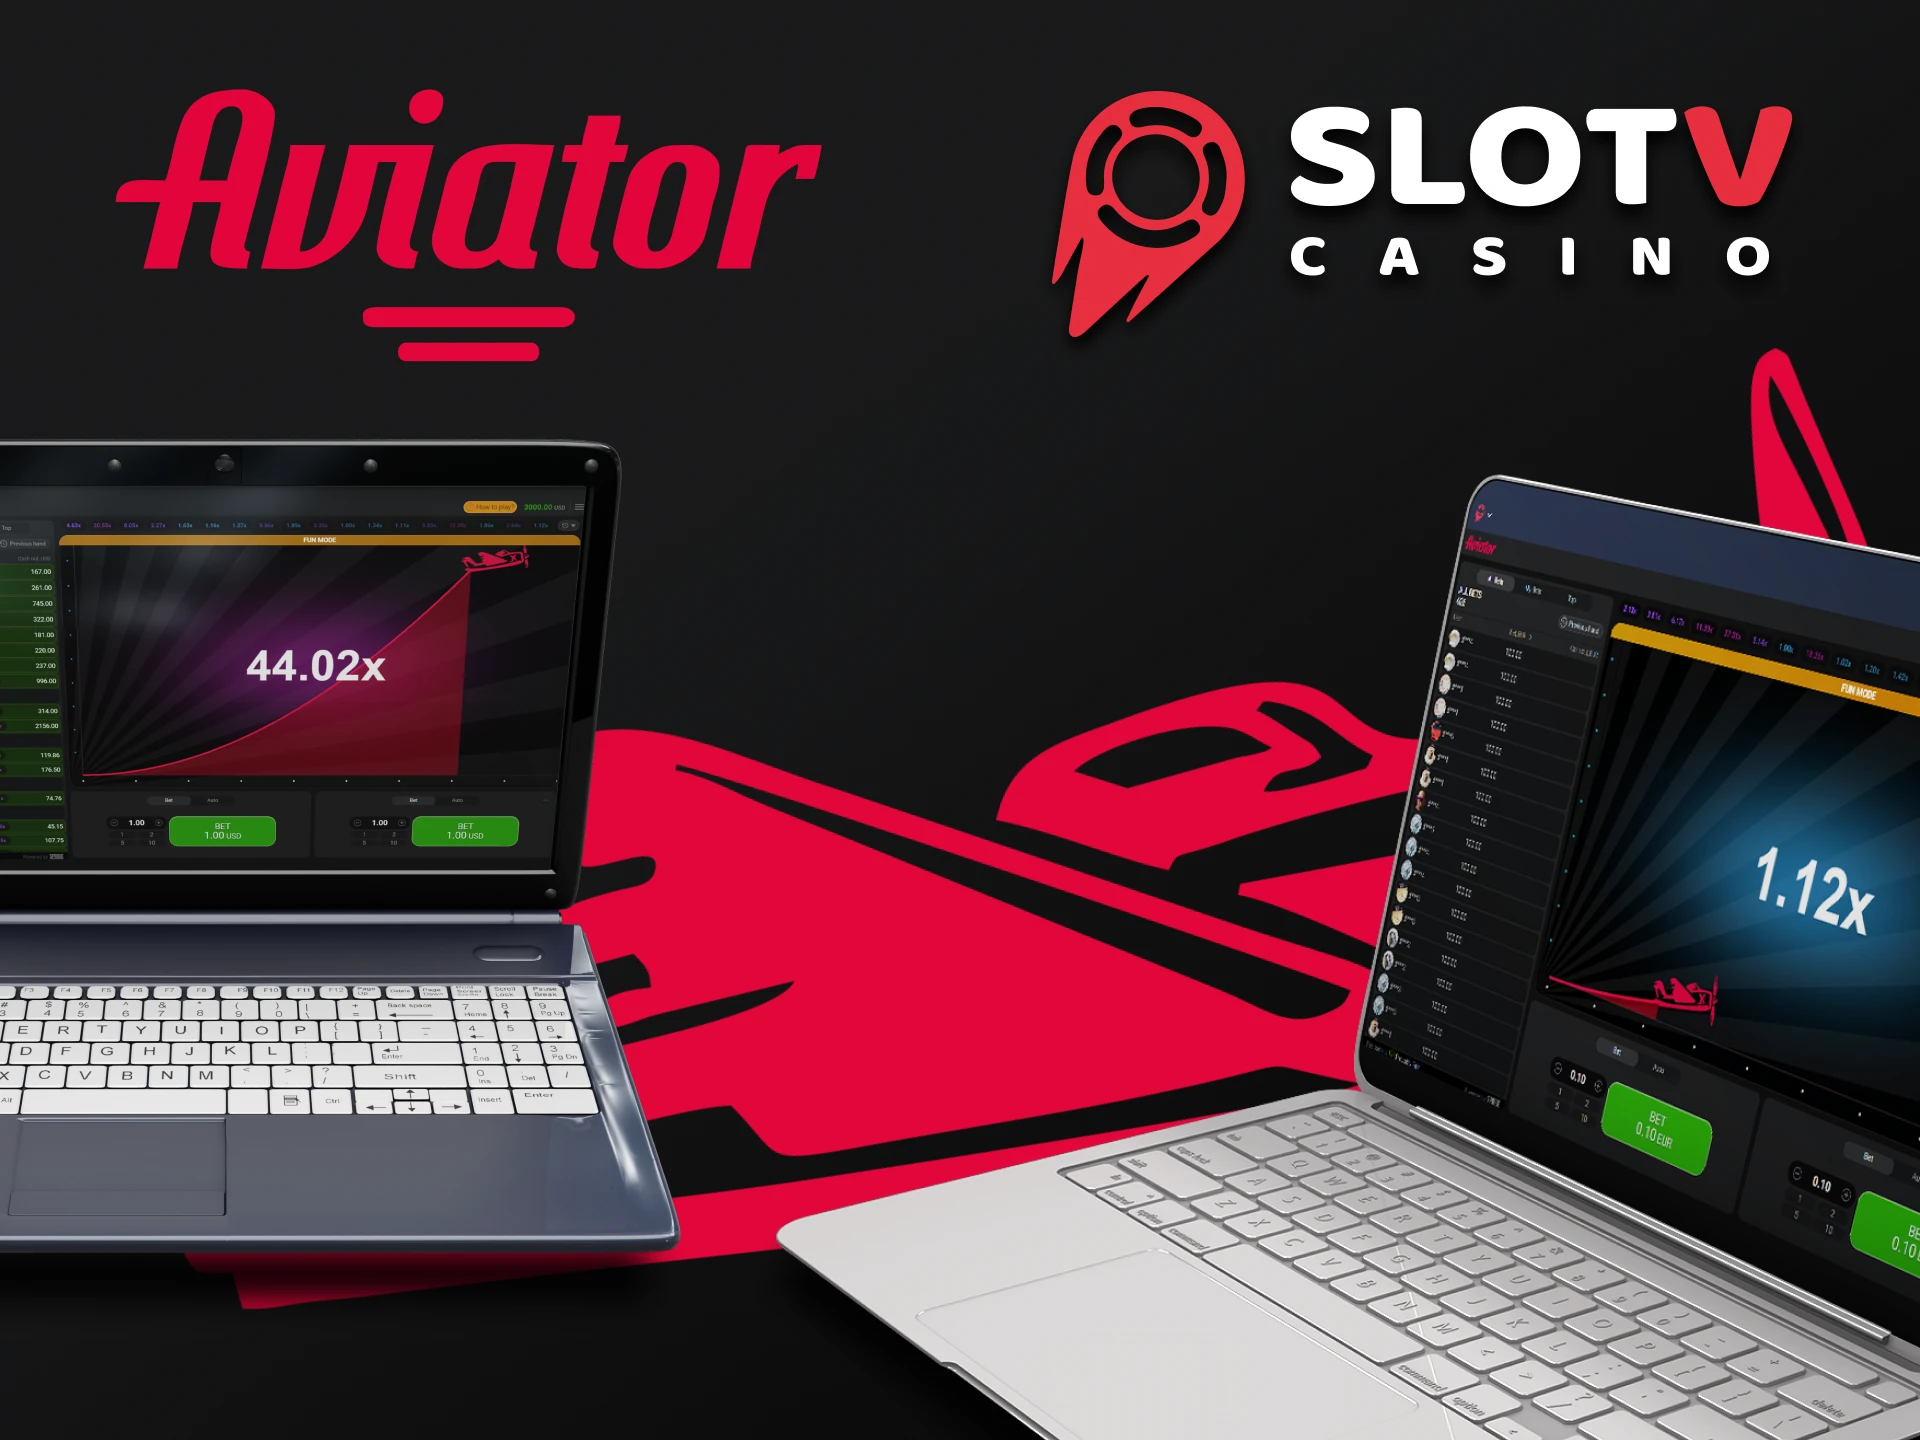 Choose your device to play Aviator on SlotV.